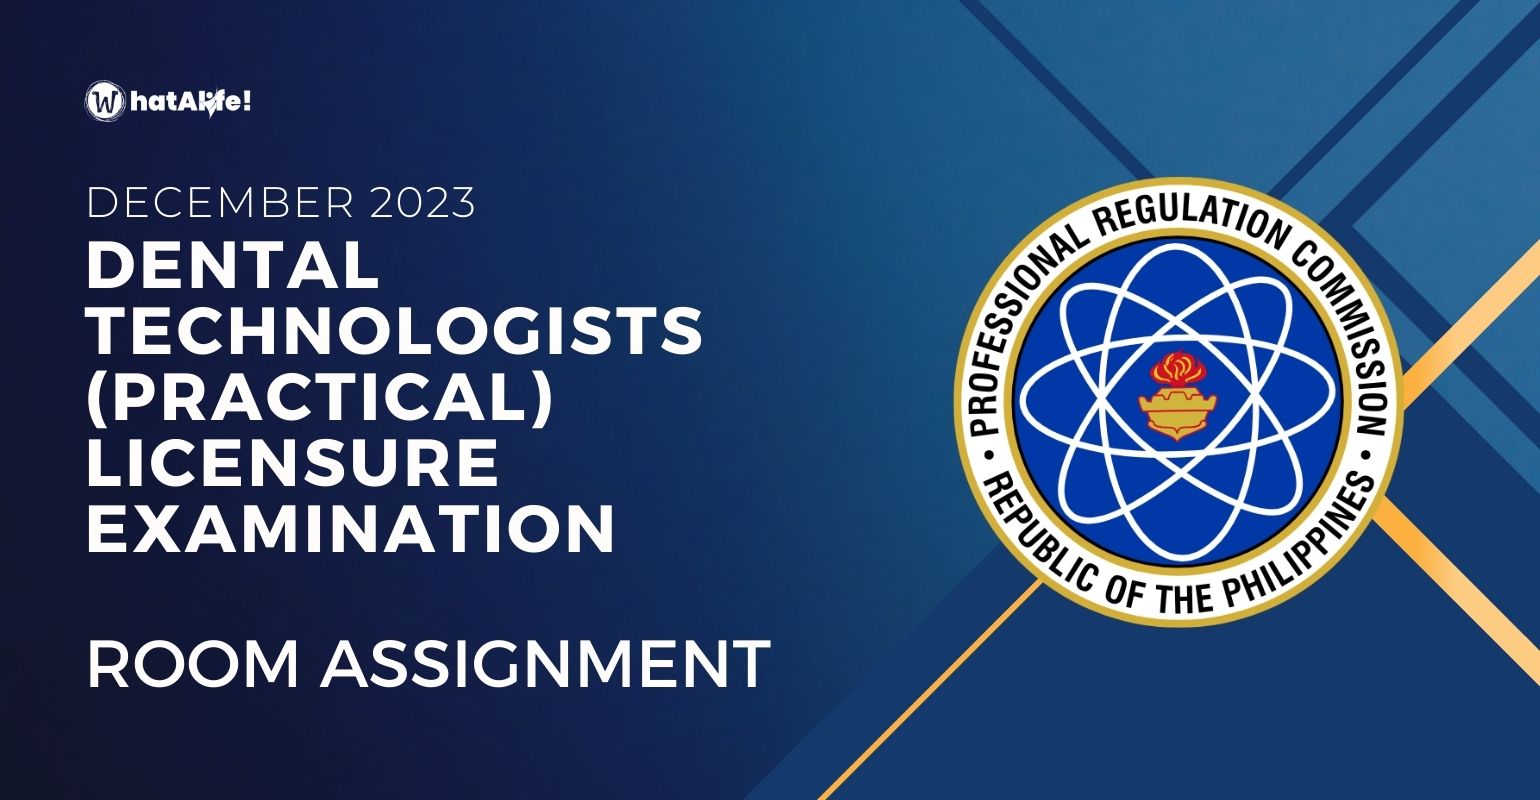 Room Assignment — December 2023 Dental Technologists (Practical) Licensure Exam